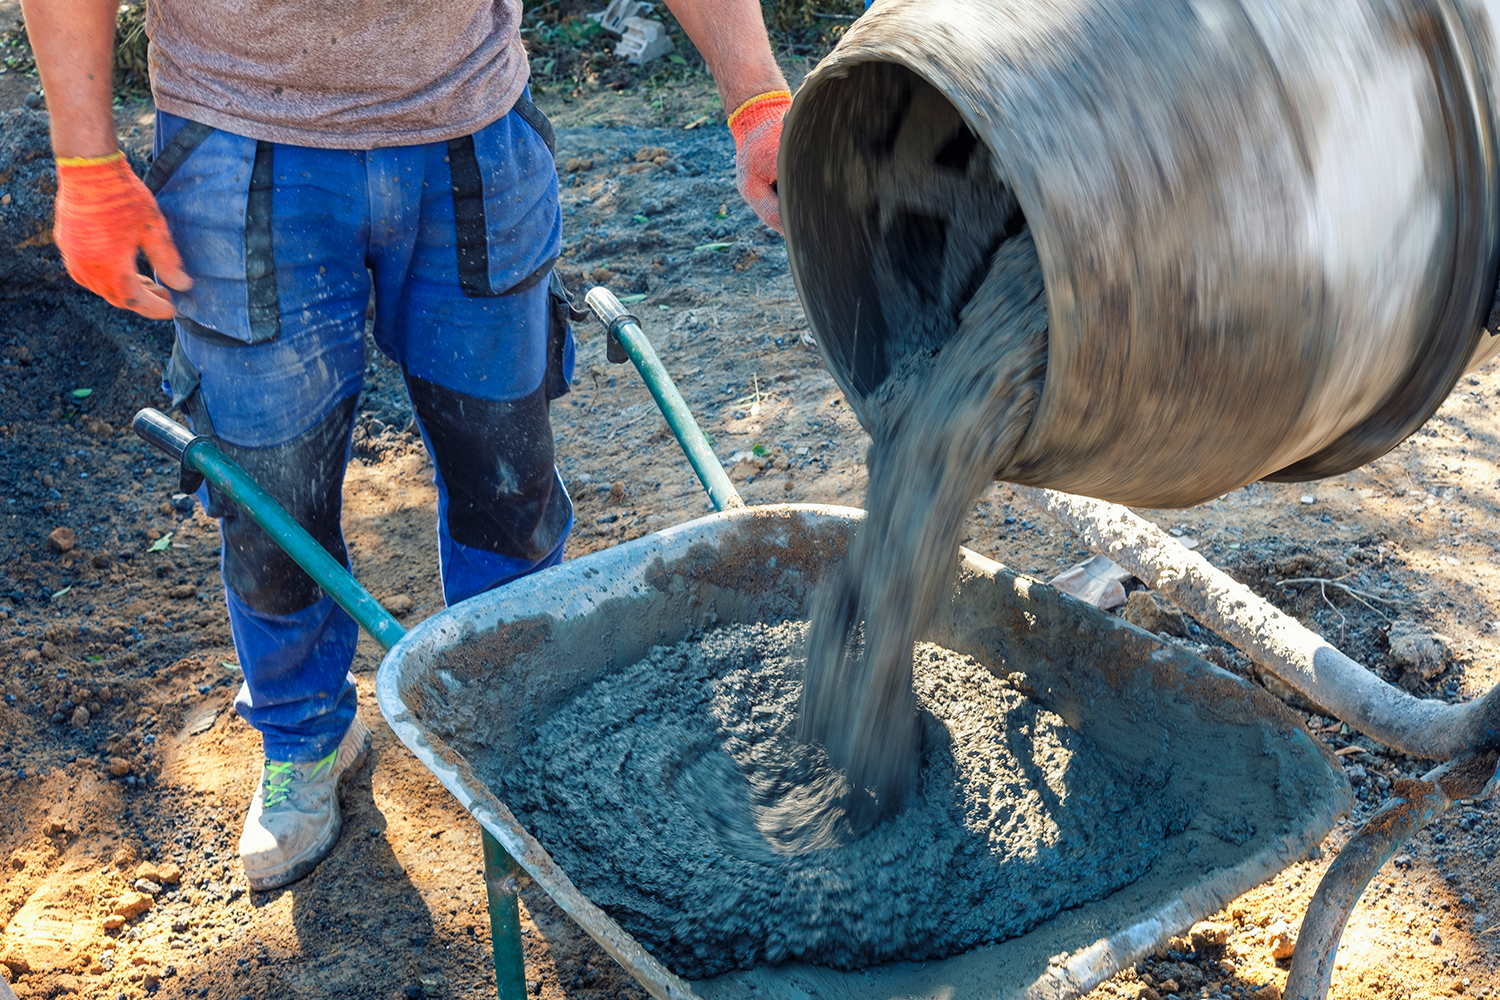 Builder Pouring Cement From A Cement Mixer 2022 12 16 12 36 28 Utc